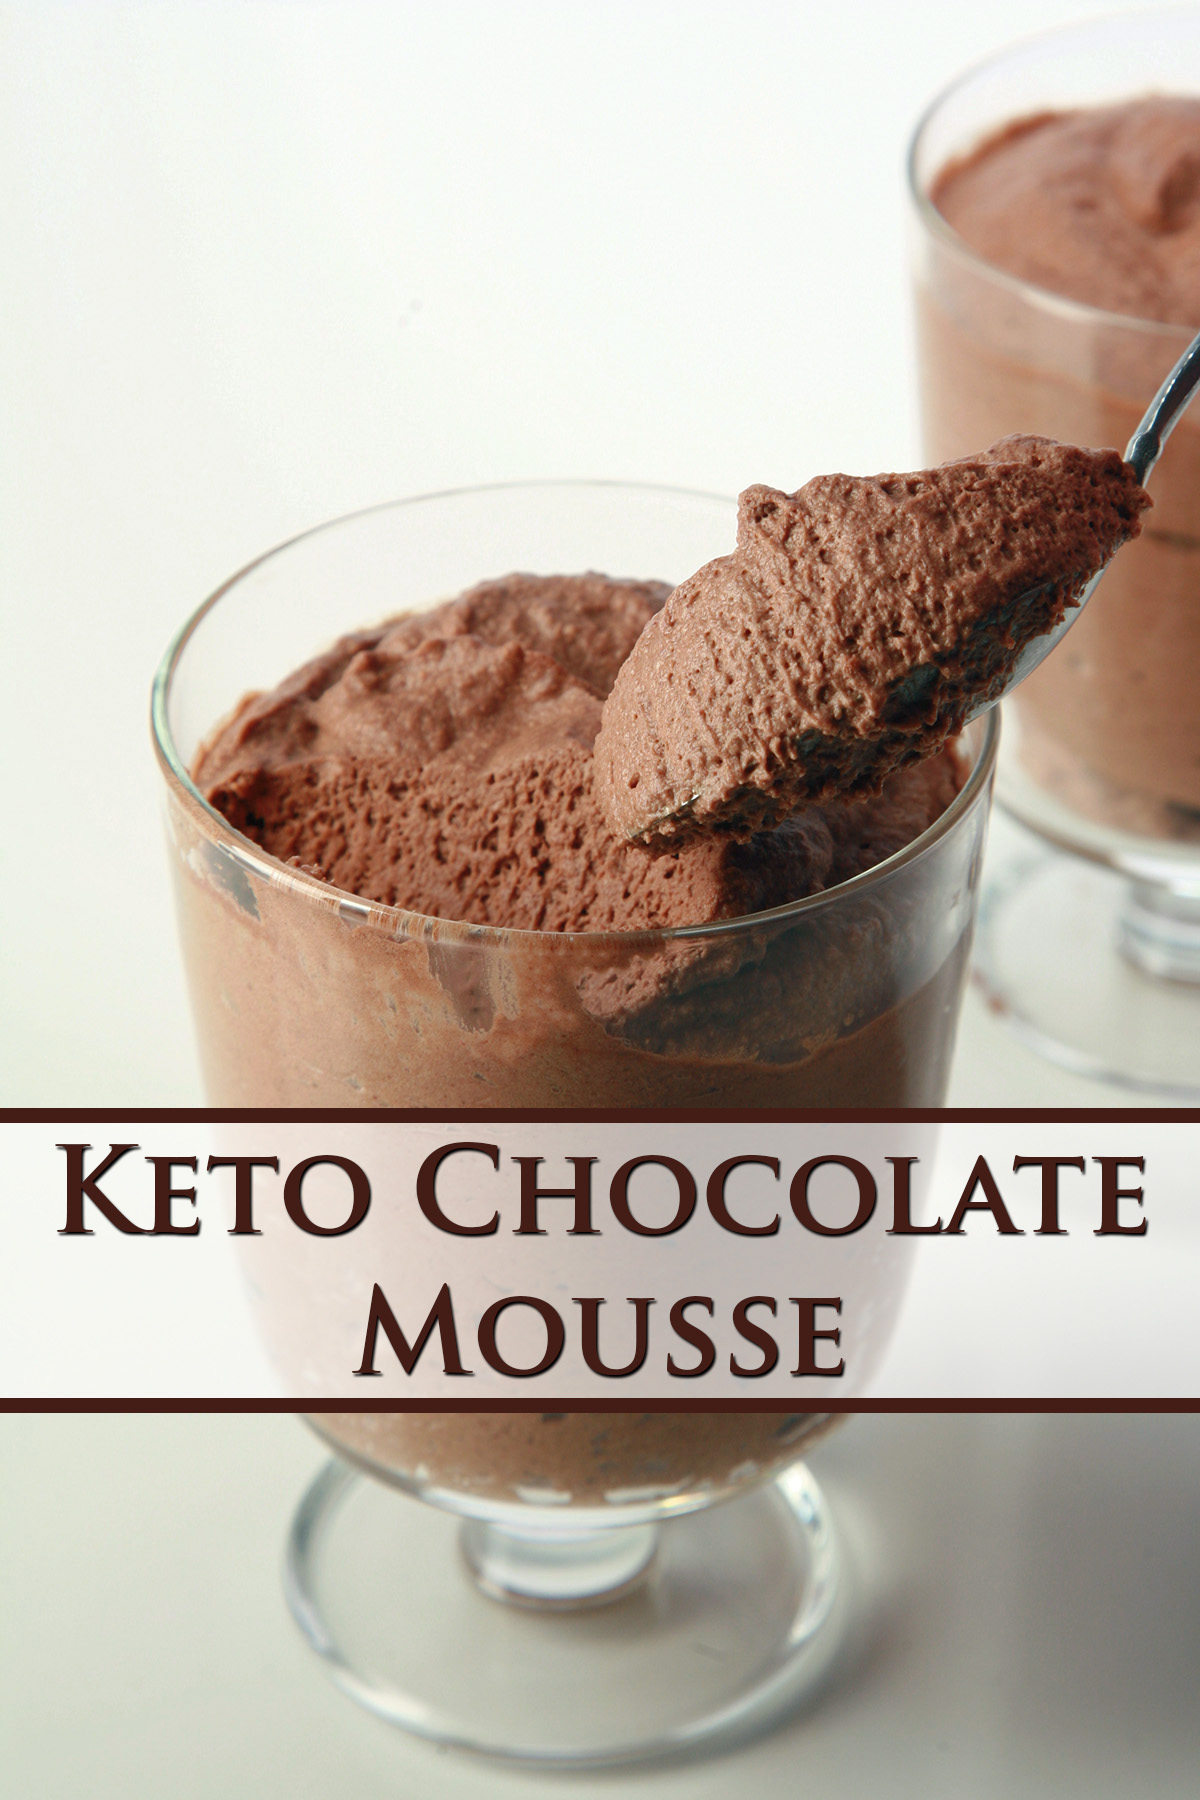 2 servings of keto chocolate mousse.